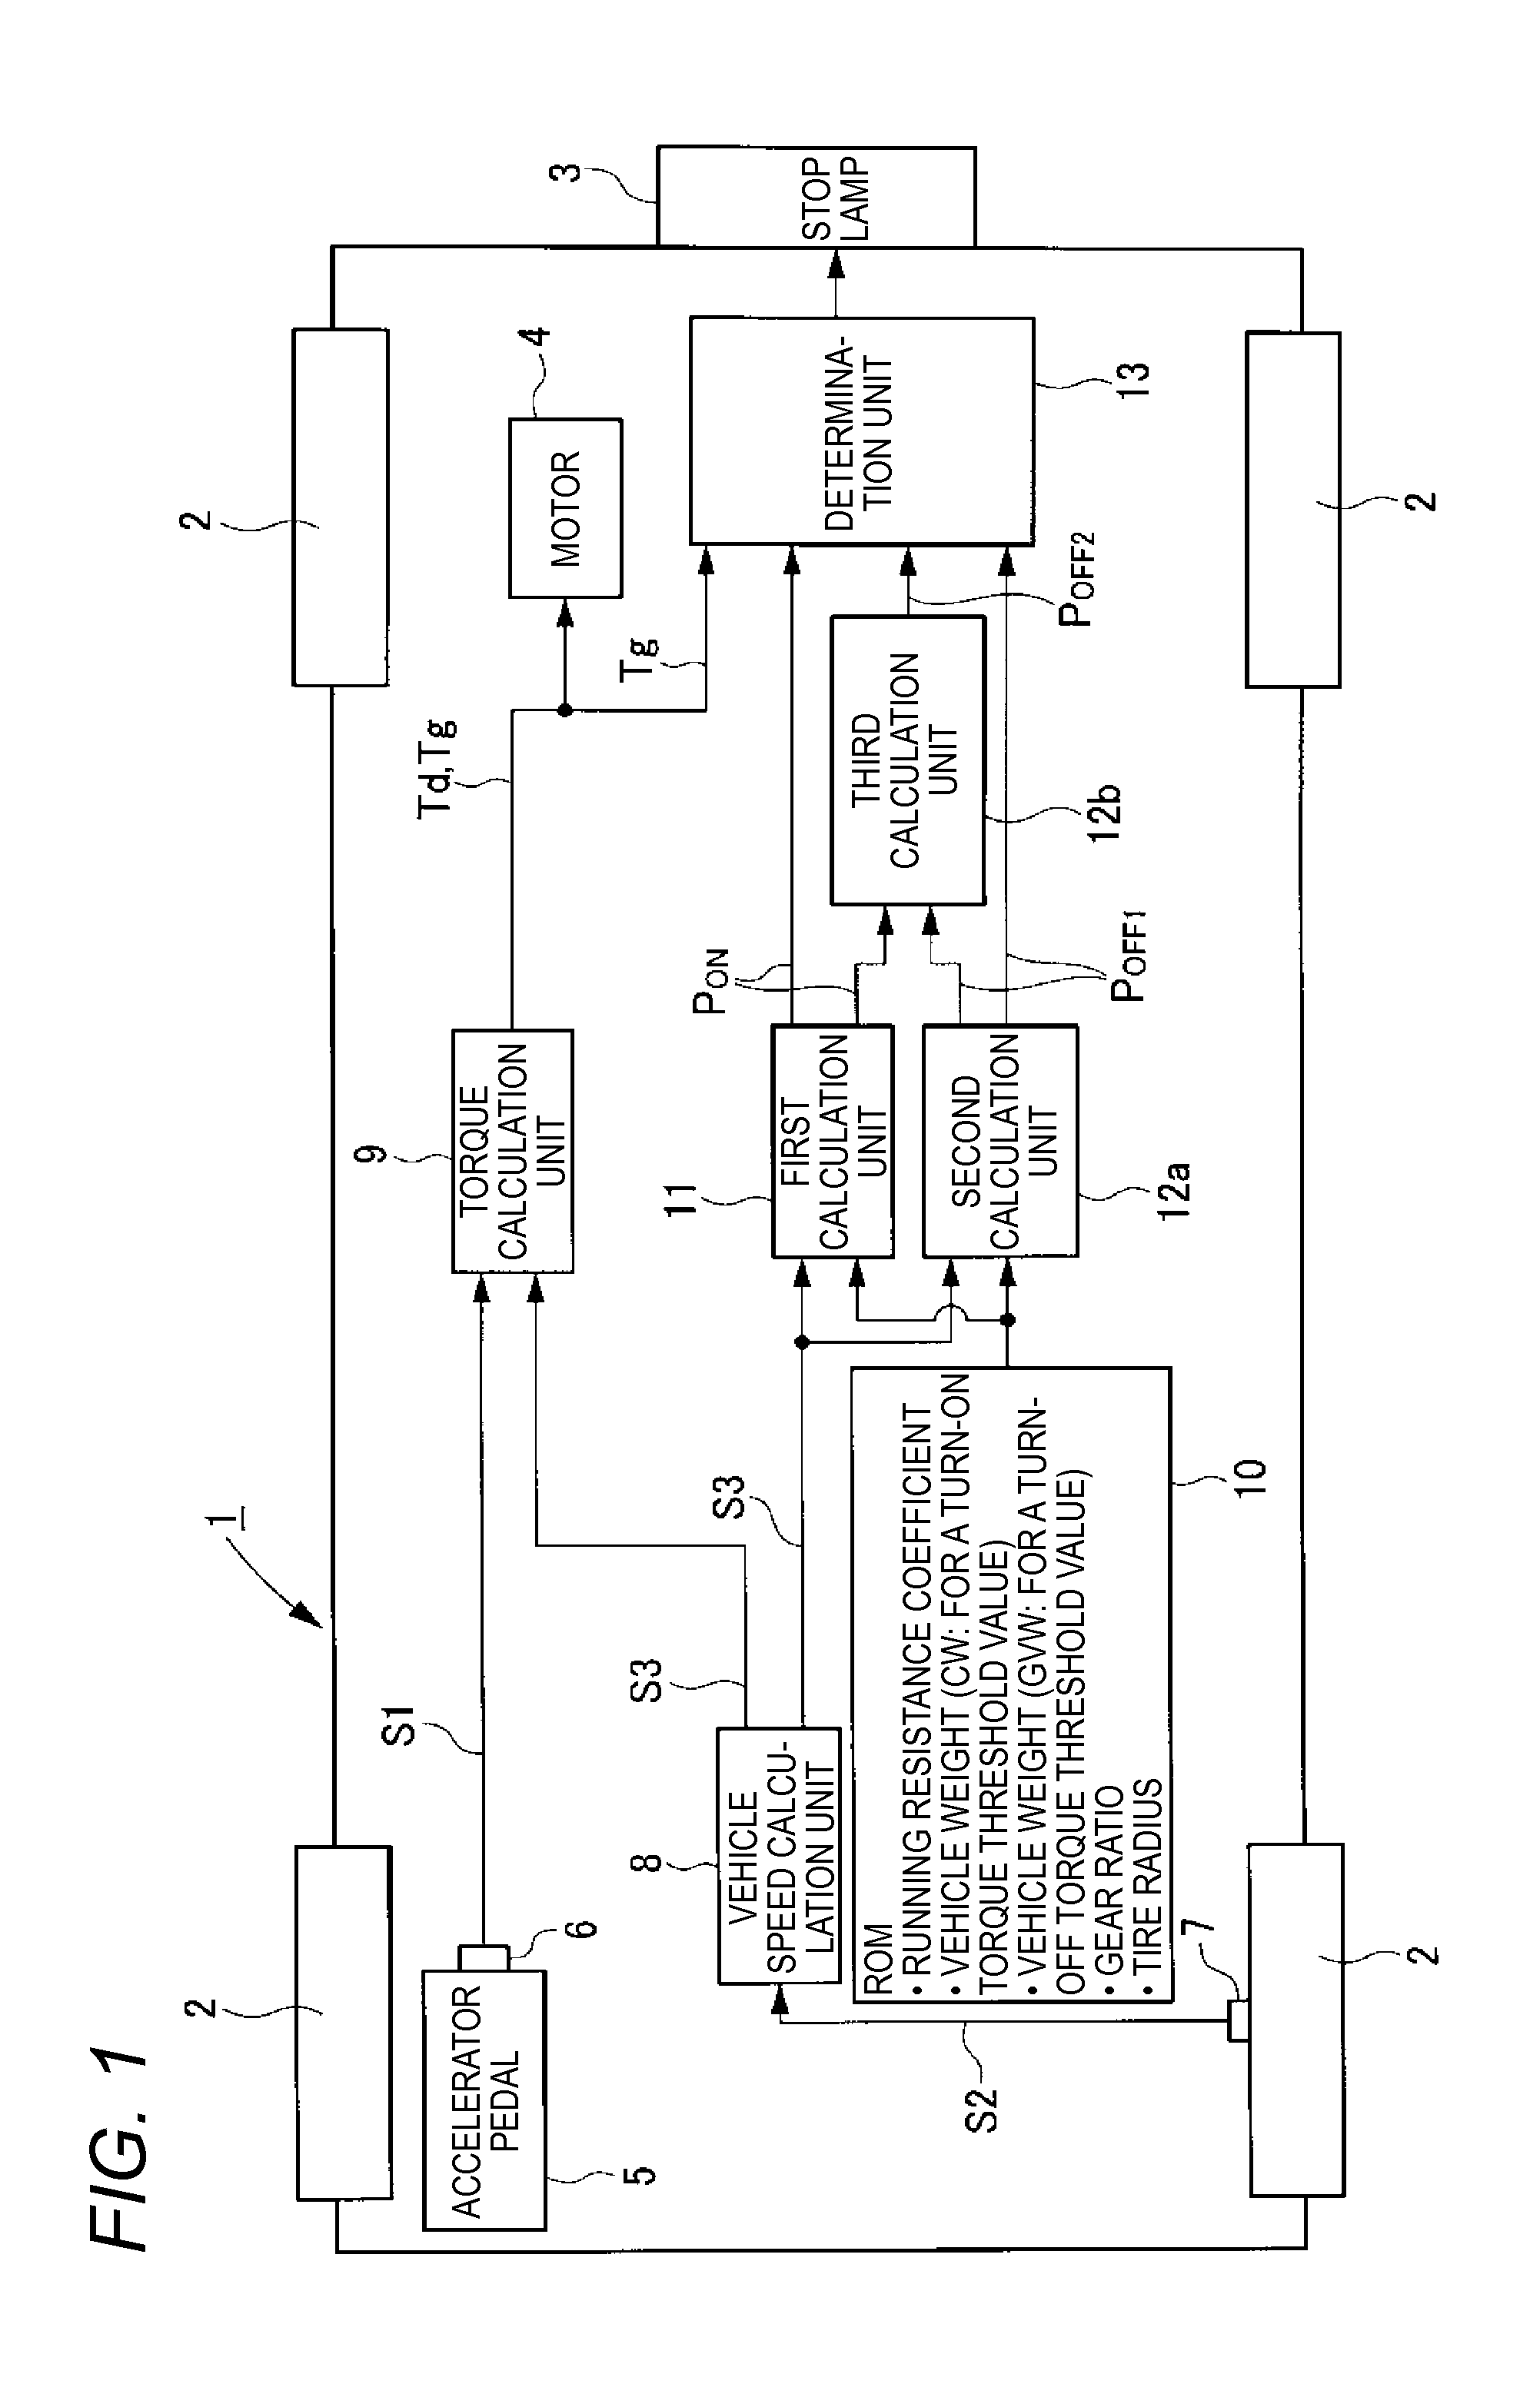 Stop lamp lighting control device for electric vehicle